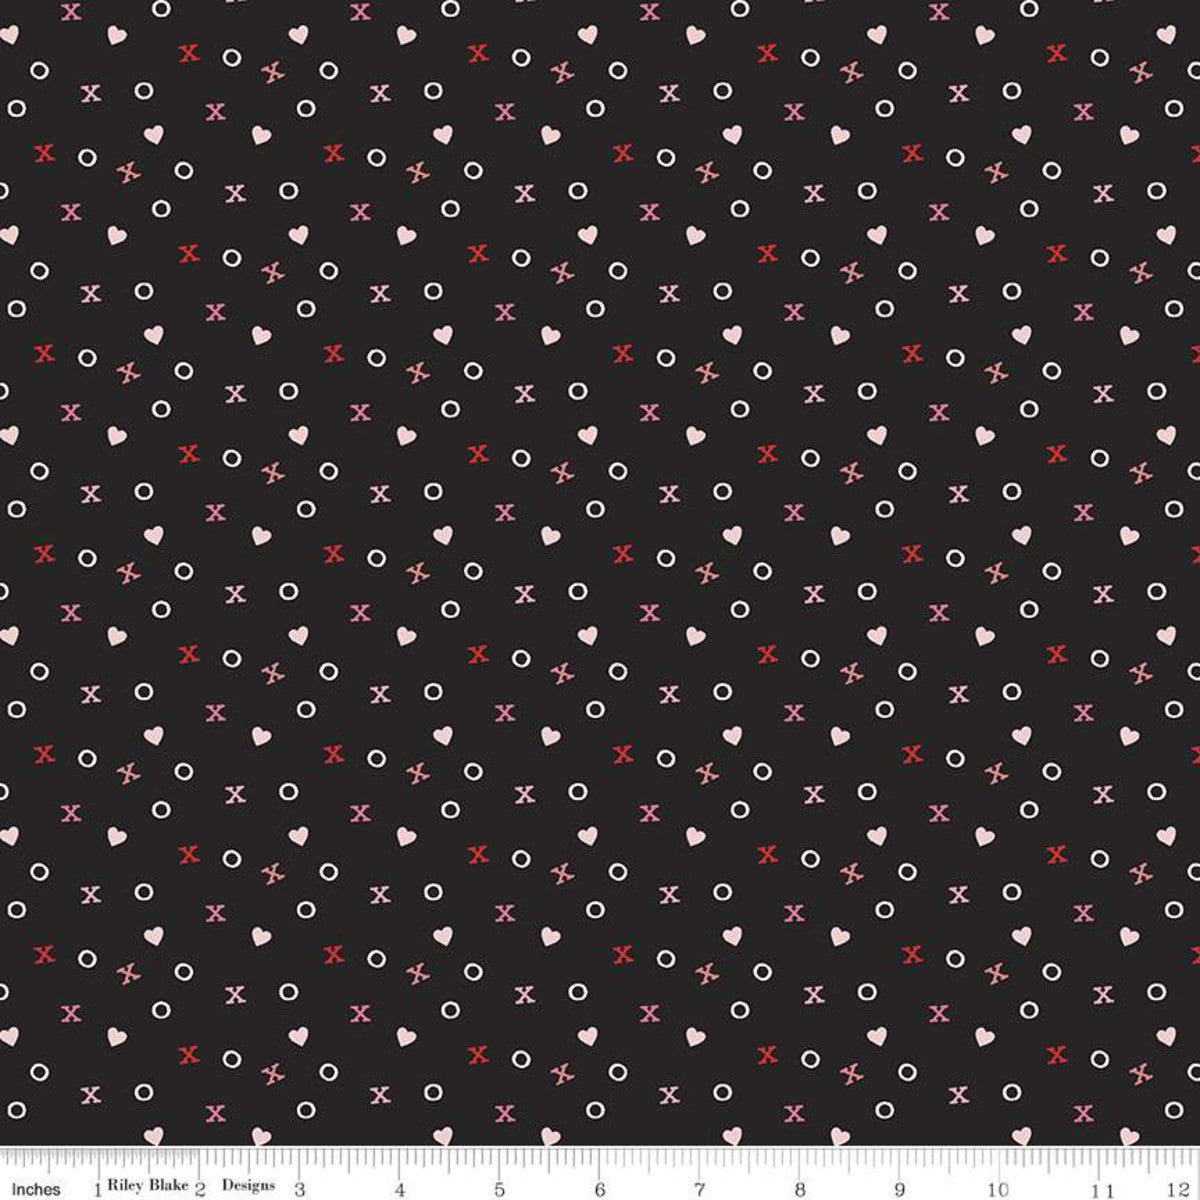 Falling in Love by Dani Mogstad Xs and Os Black      C11283-BLACK Cotton Woven Fabric